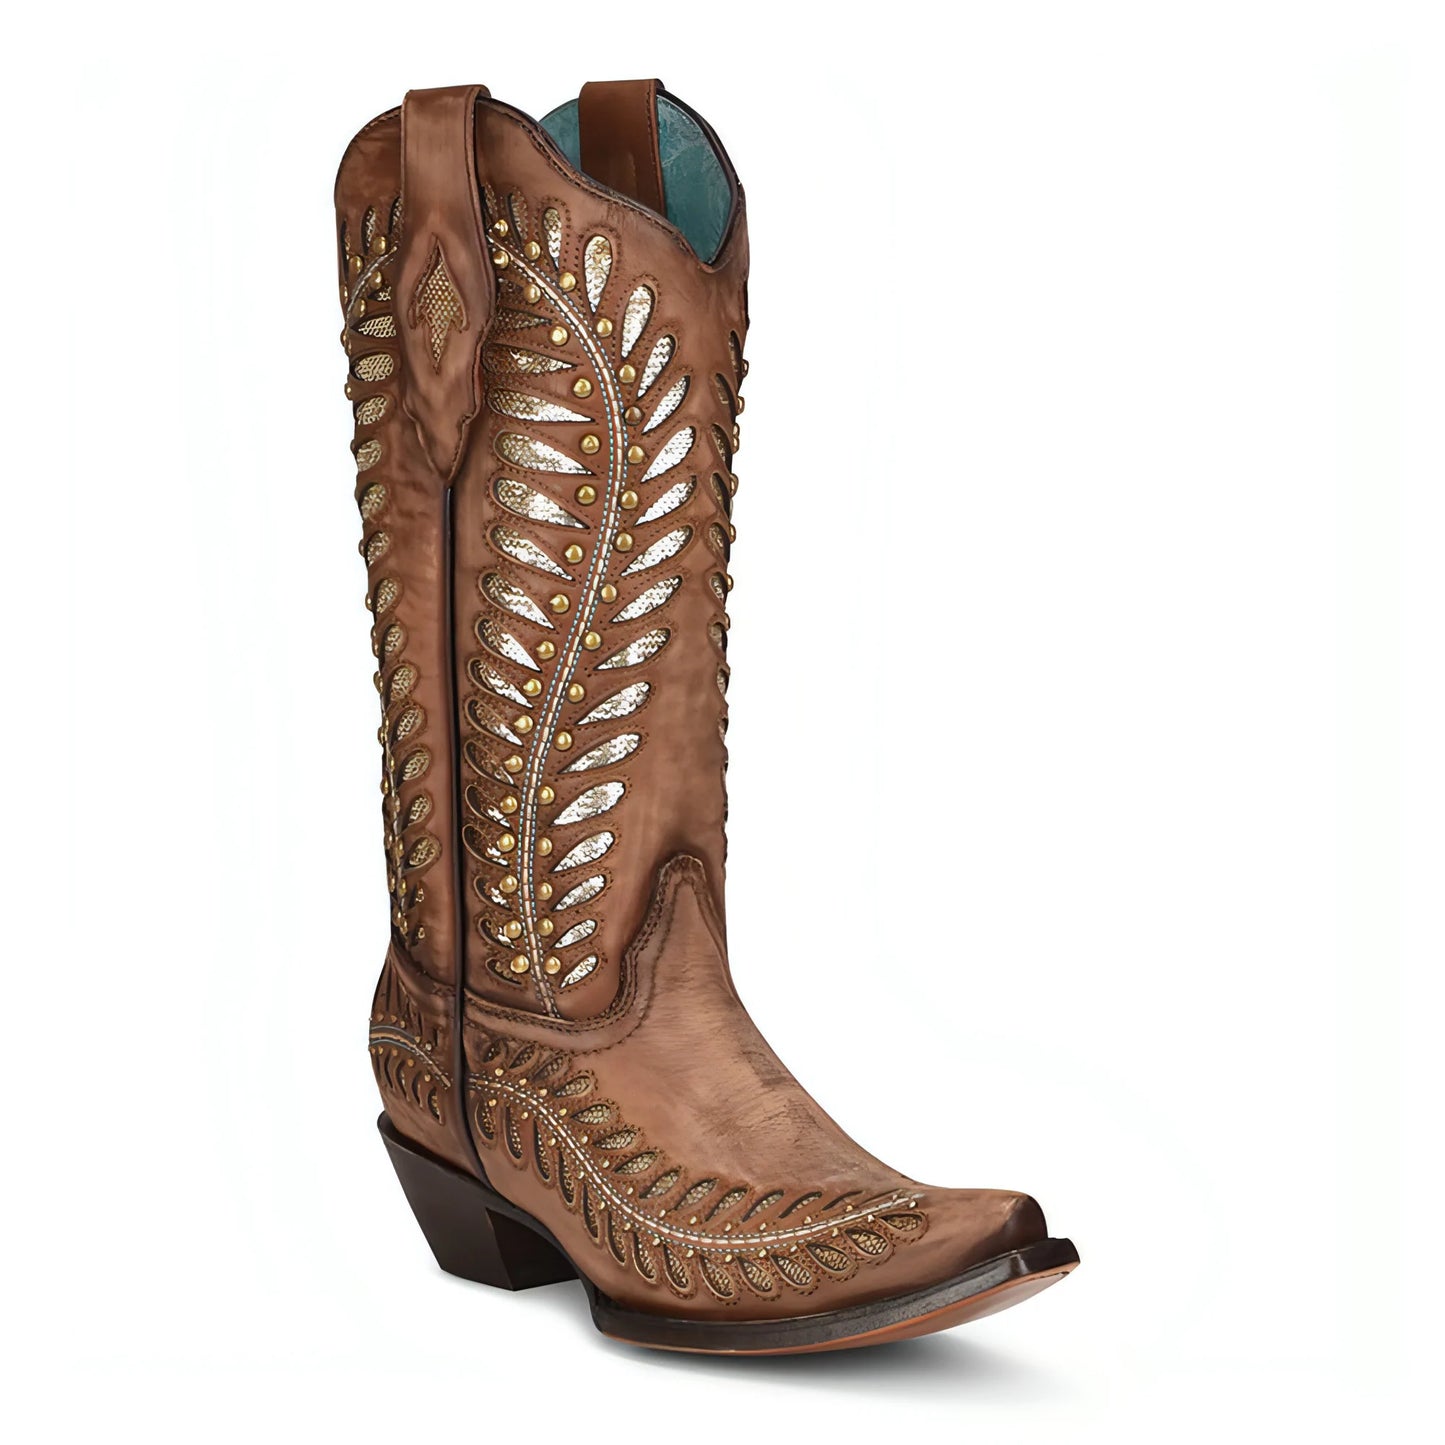 The Lakyn Corral Boots